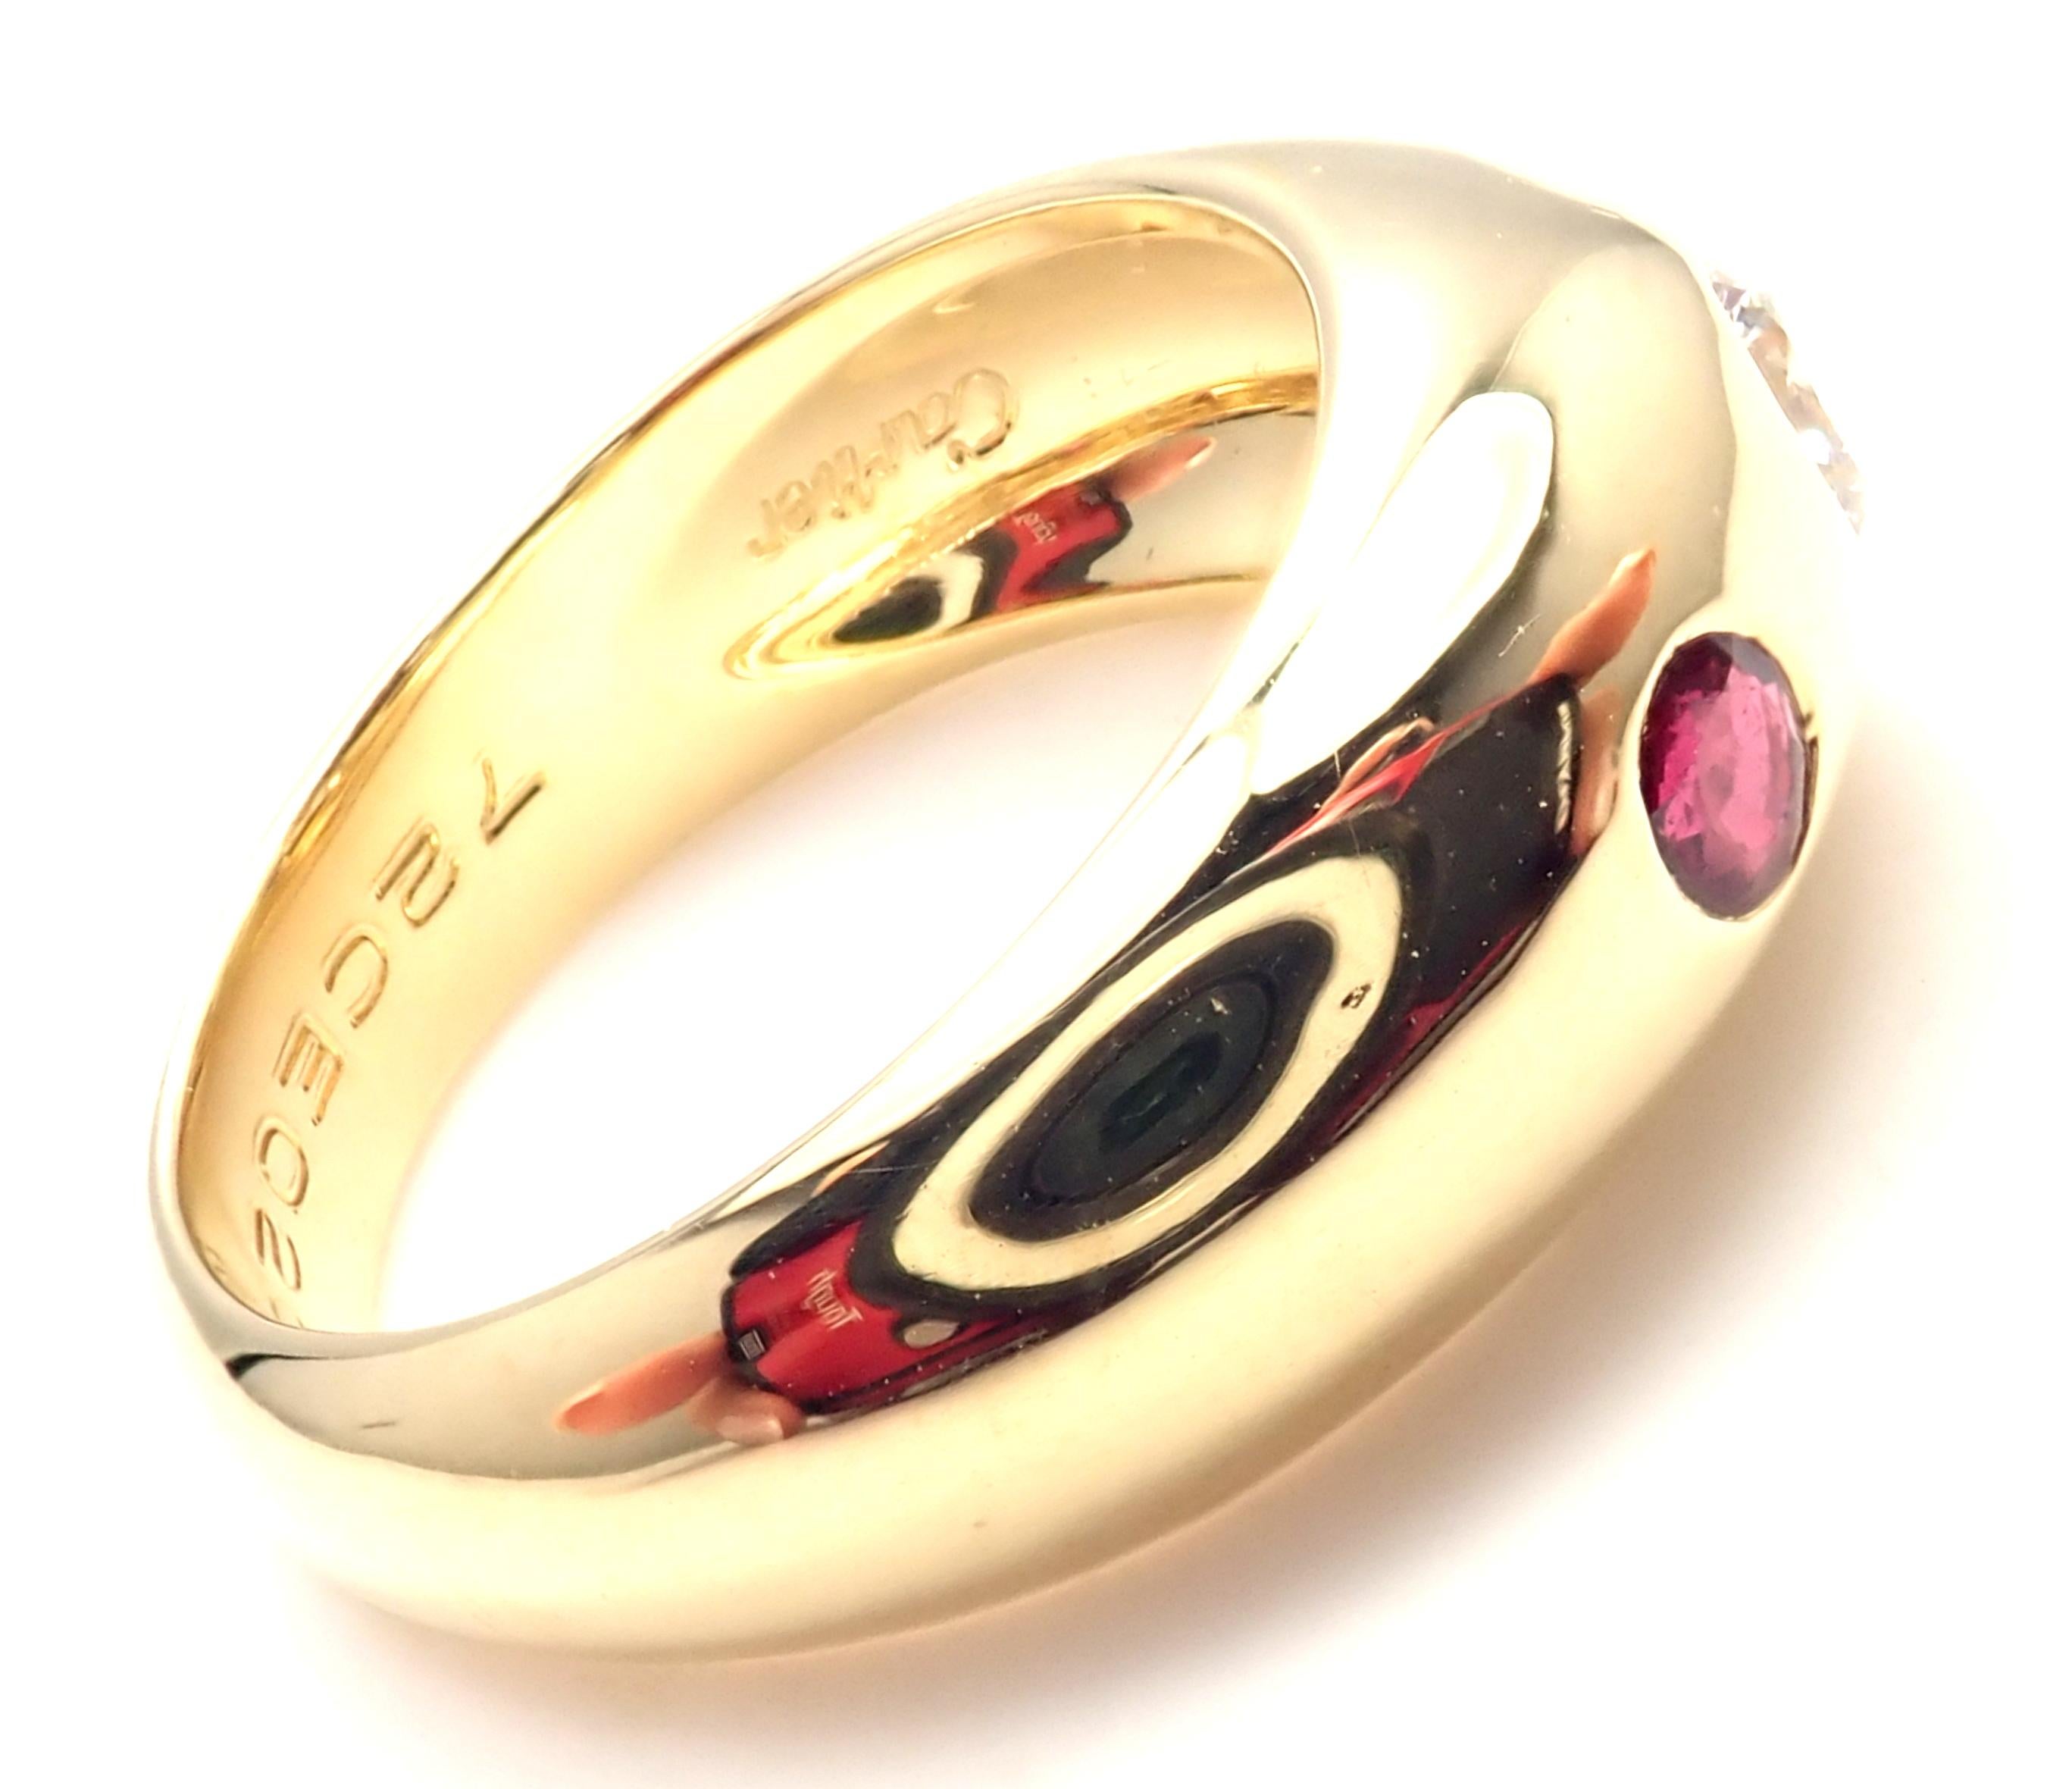 18k Yellow Gold And Diamond Ruby Band Ring by Cartier. 
With 1 diamond approx. .10ctw
VVS1 clarity, H color
2 rubies approx .05ct each
Measurements: 
Weight: 7.8 grams
Width:  8mm
Ring Size: European 51 US 5 3/4
Stamped Hallmarks: 750 Cartier 51